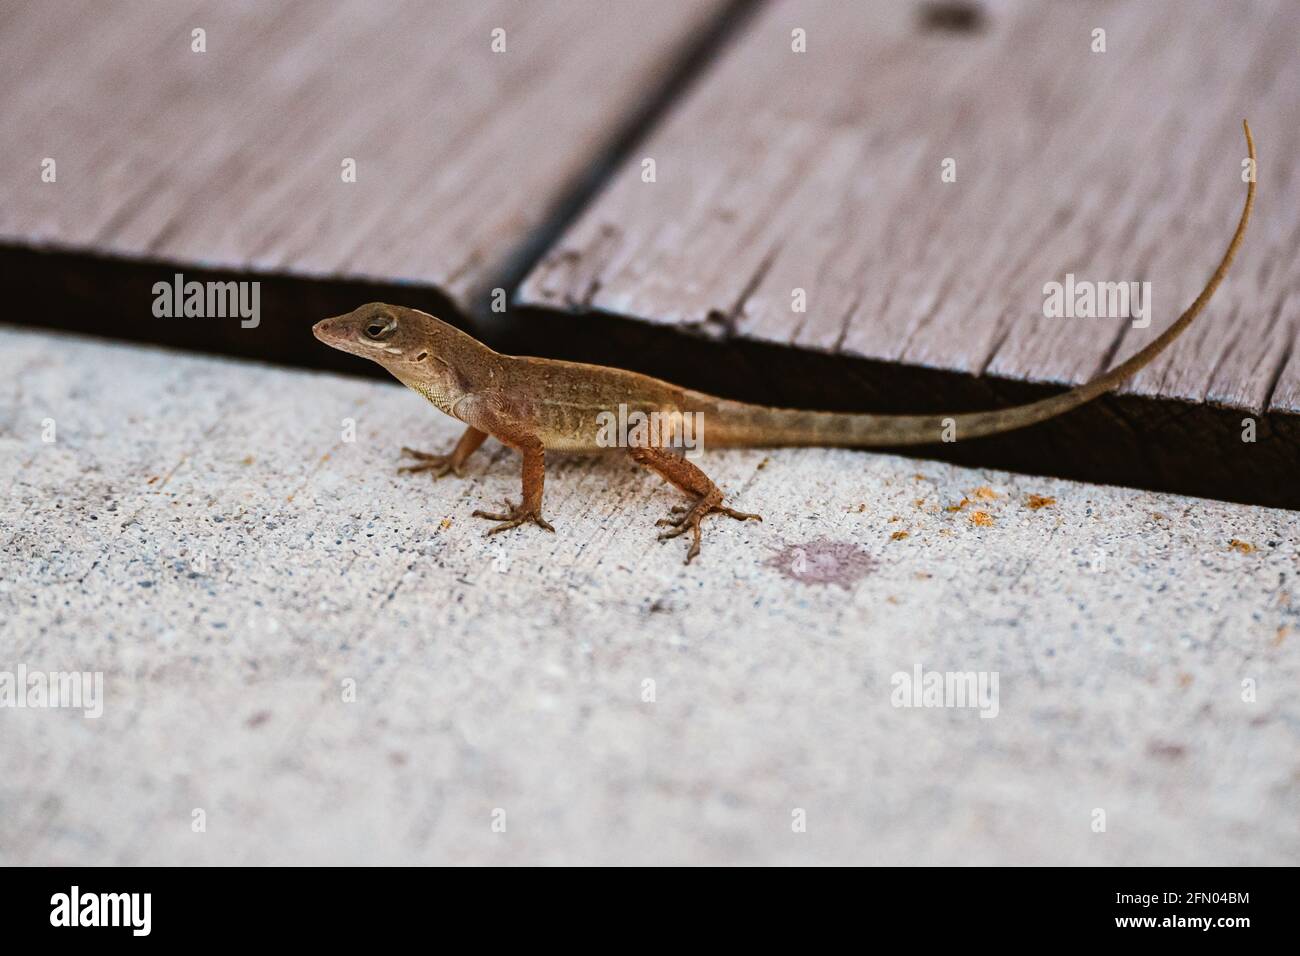 A small lizard sits on the edge of a sidewalk in close up Stock Photo